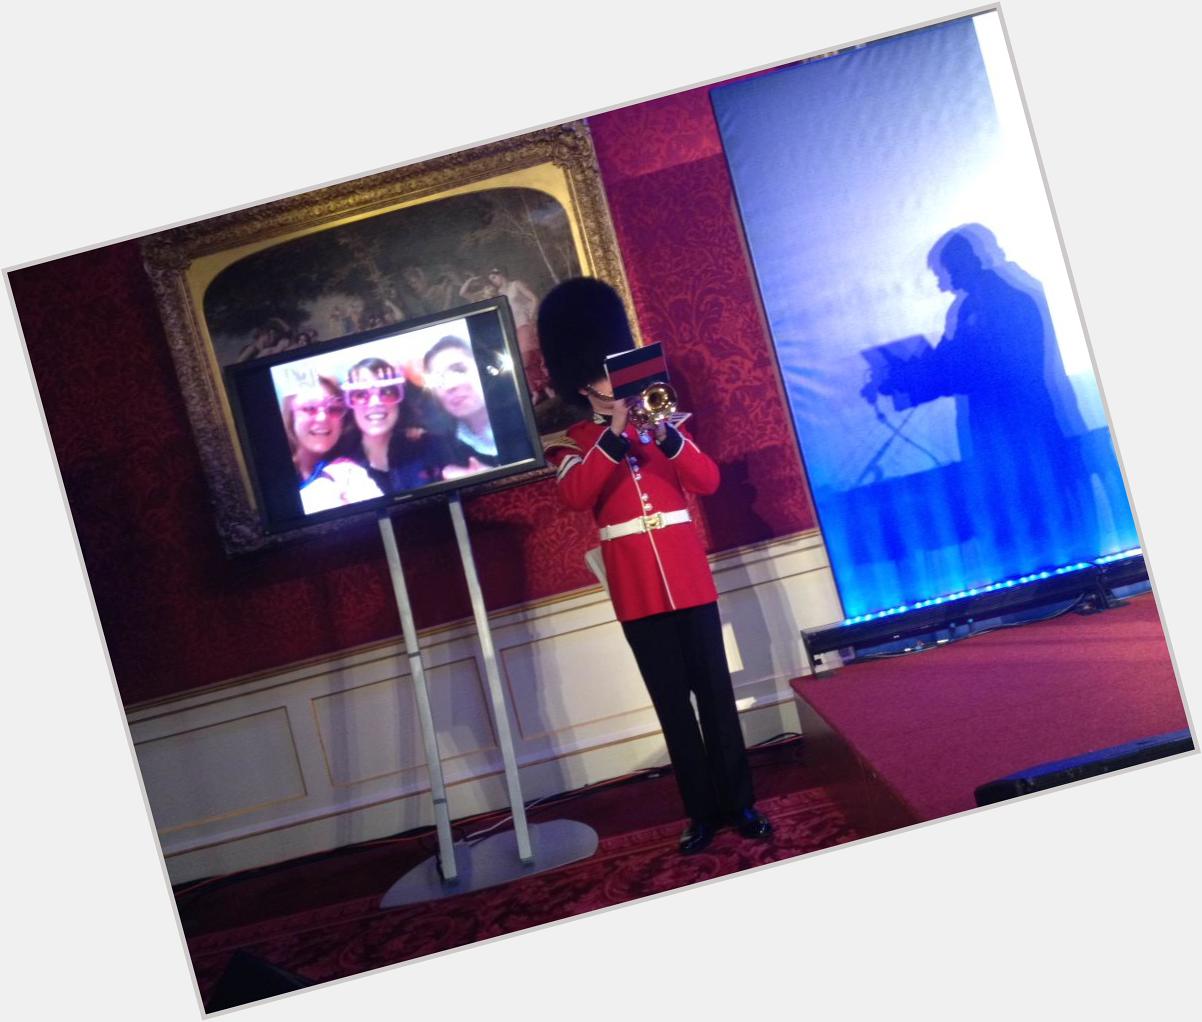 Happy Birthday Princess Eugenie! Skypes his daughter during ahead of the pitches! 